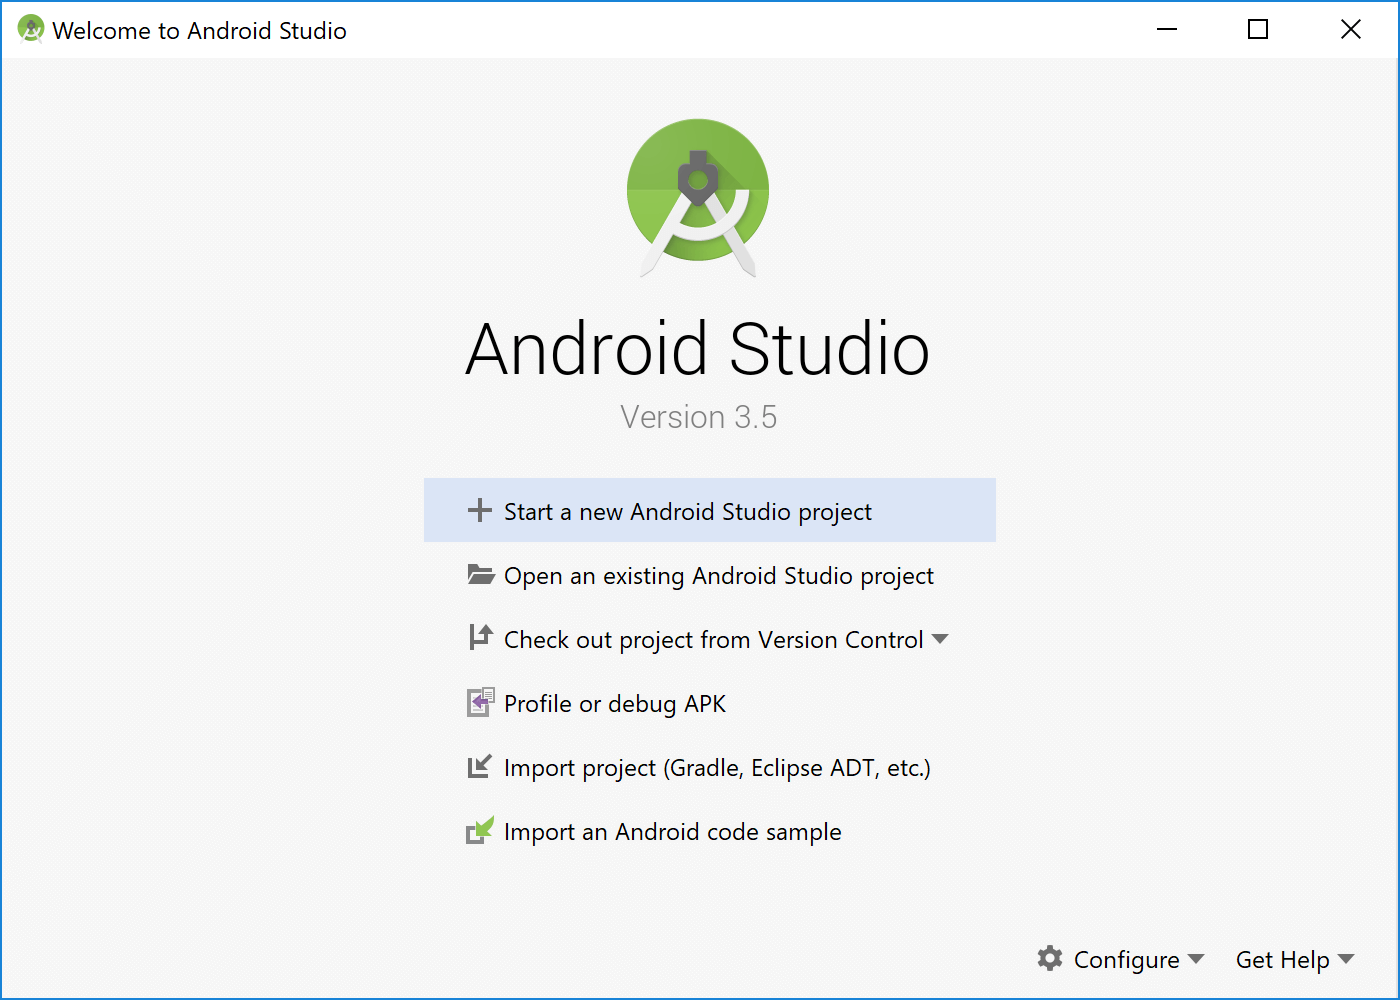 android_studio_welcome